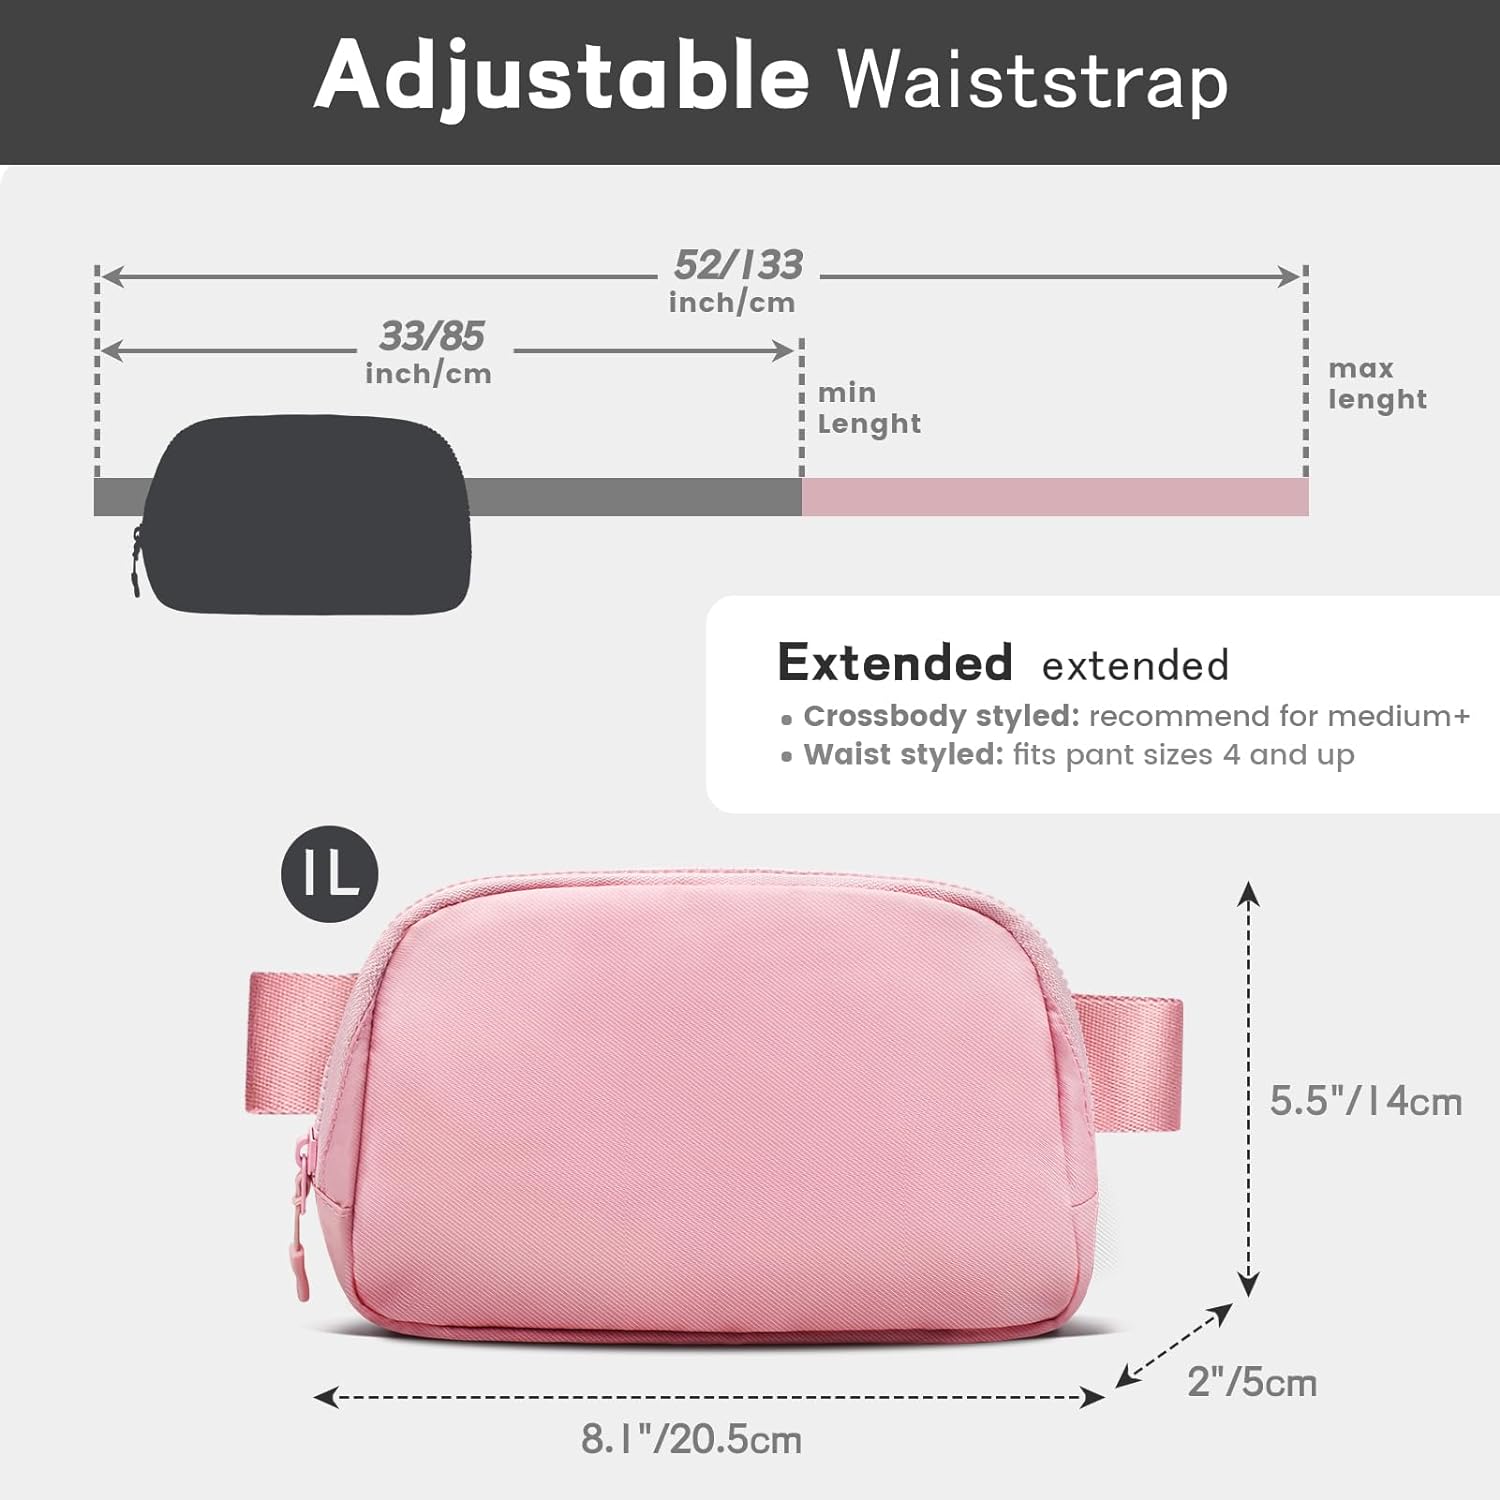 Everywhere Belt Bag for Women, viewm Waterproof Crossbody Fanny Pack Dupes for Women Men Fashion Waist Packs with Adjustable Strap for Travel Fitness Running Hiking, Pink